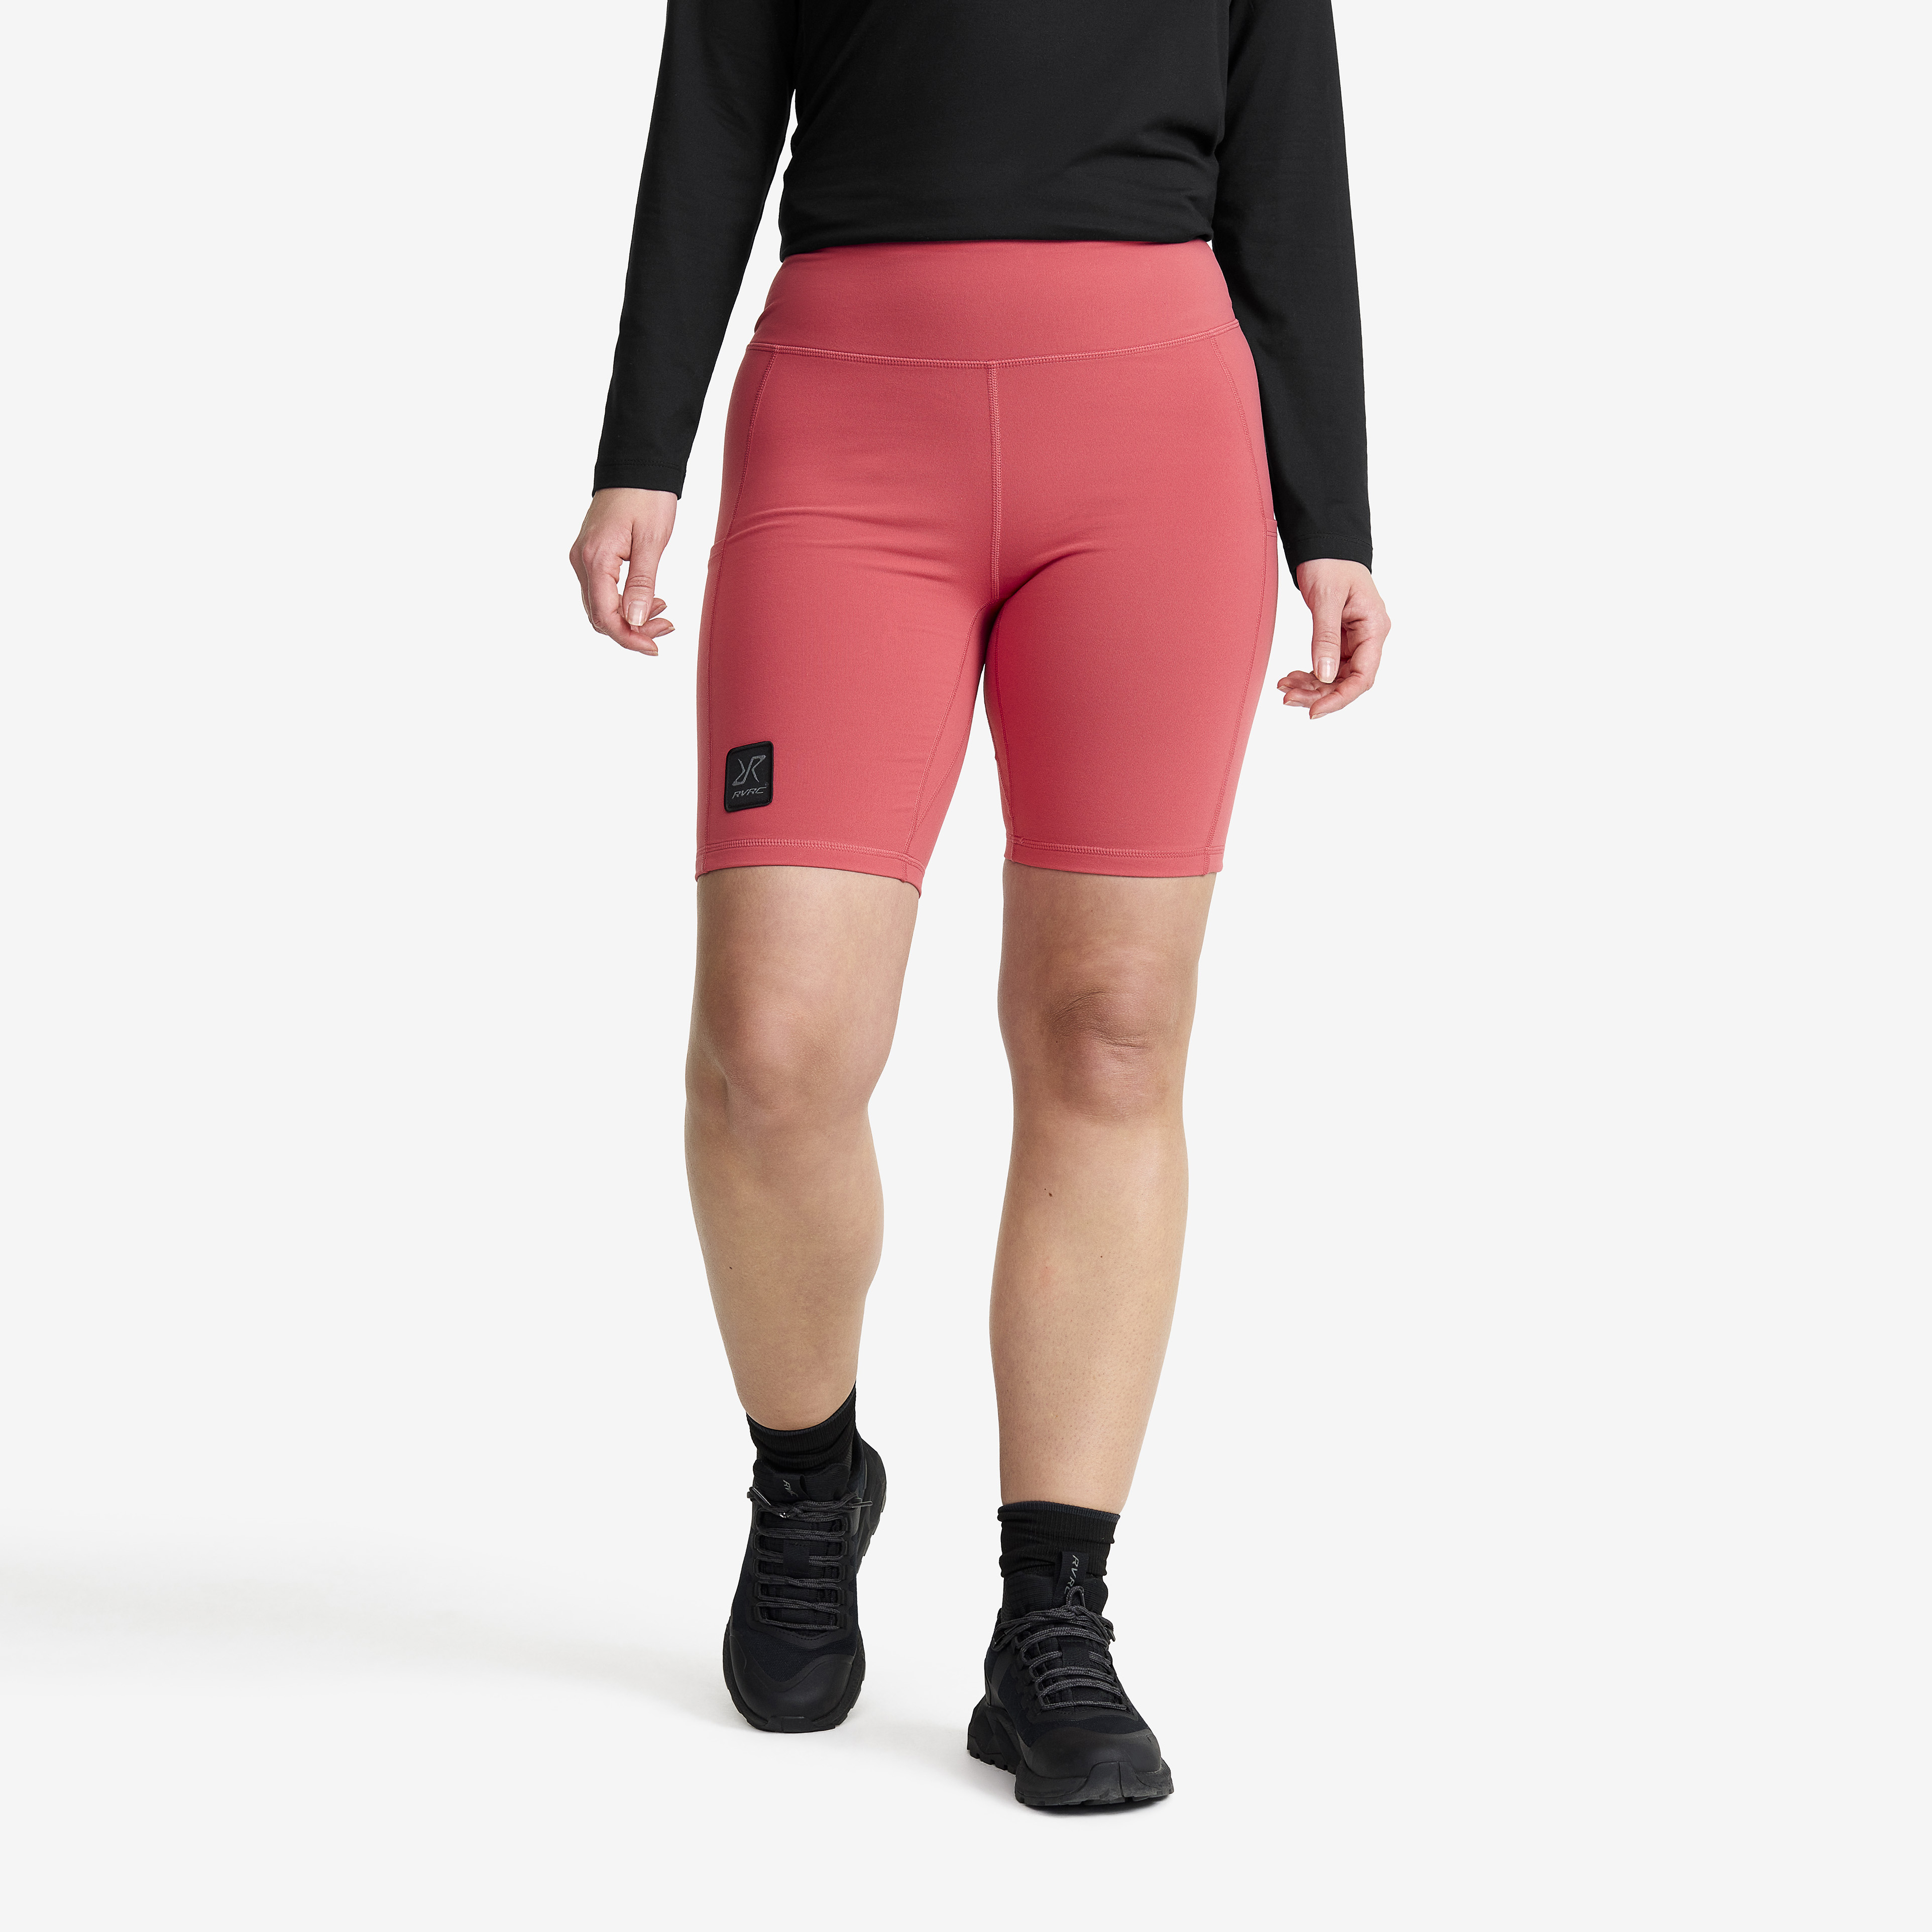 Summit Short Tights Holly Berry Women